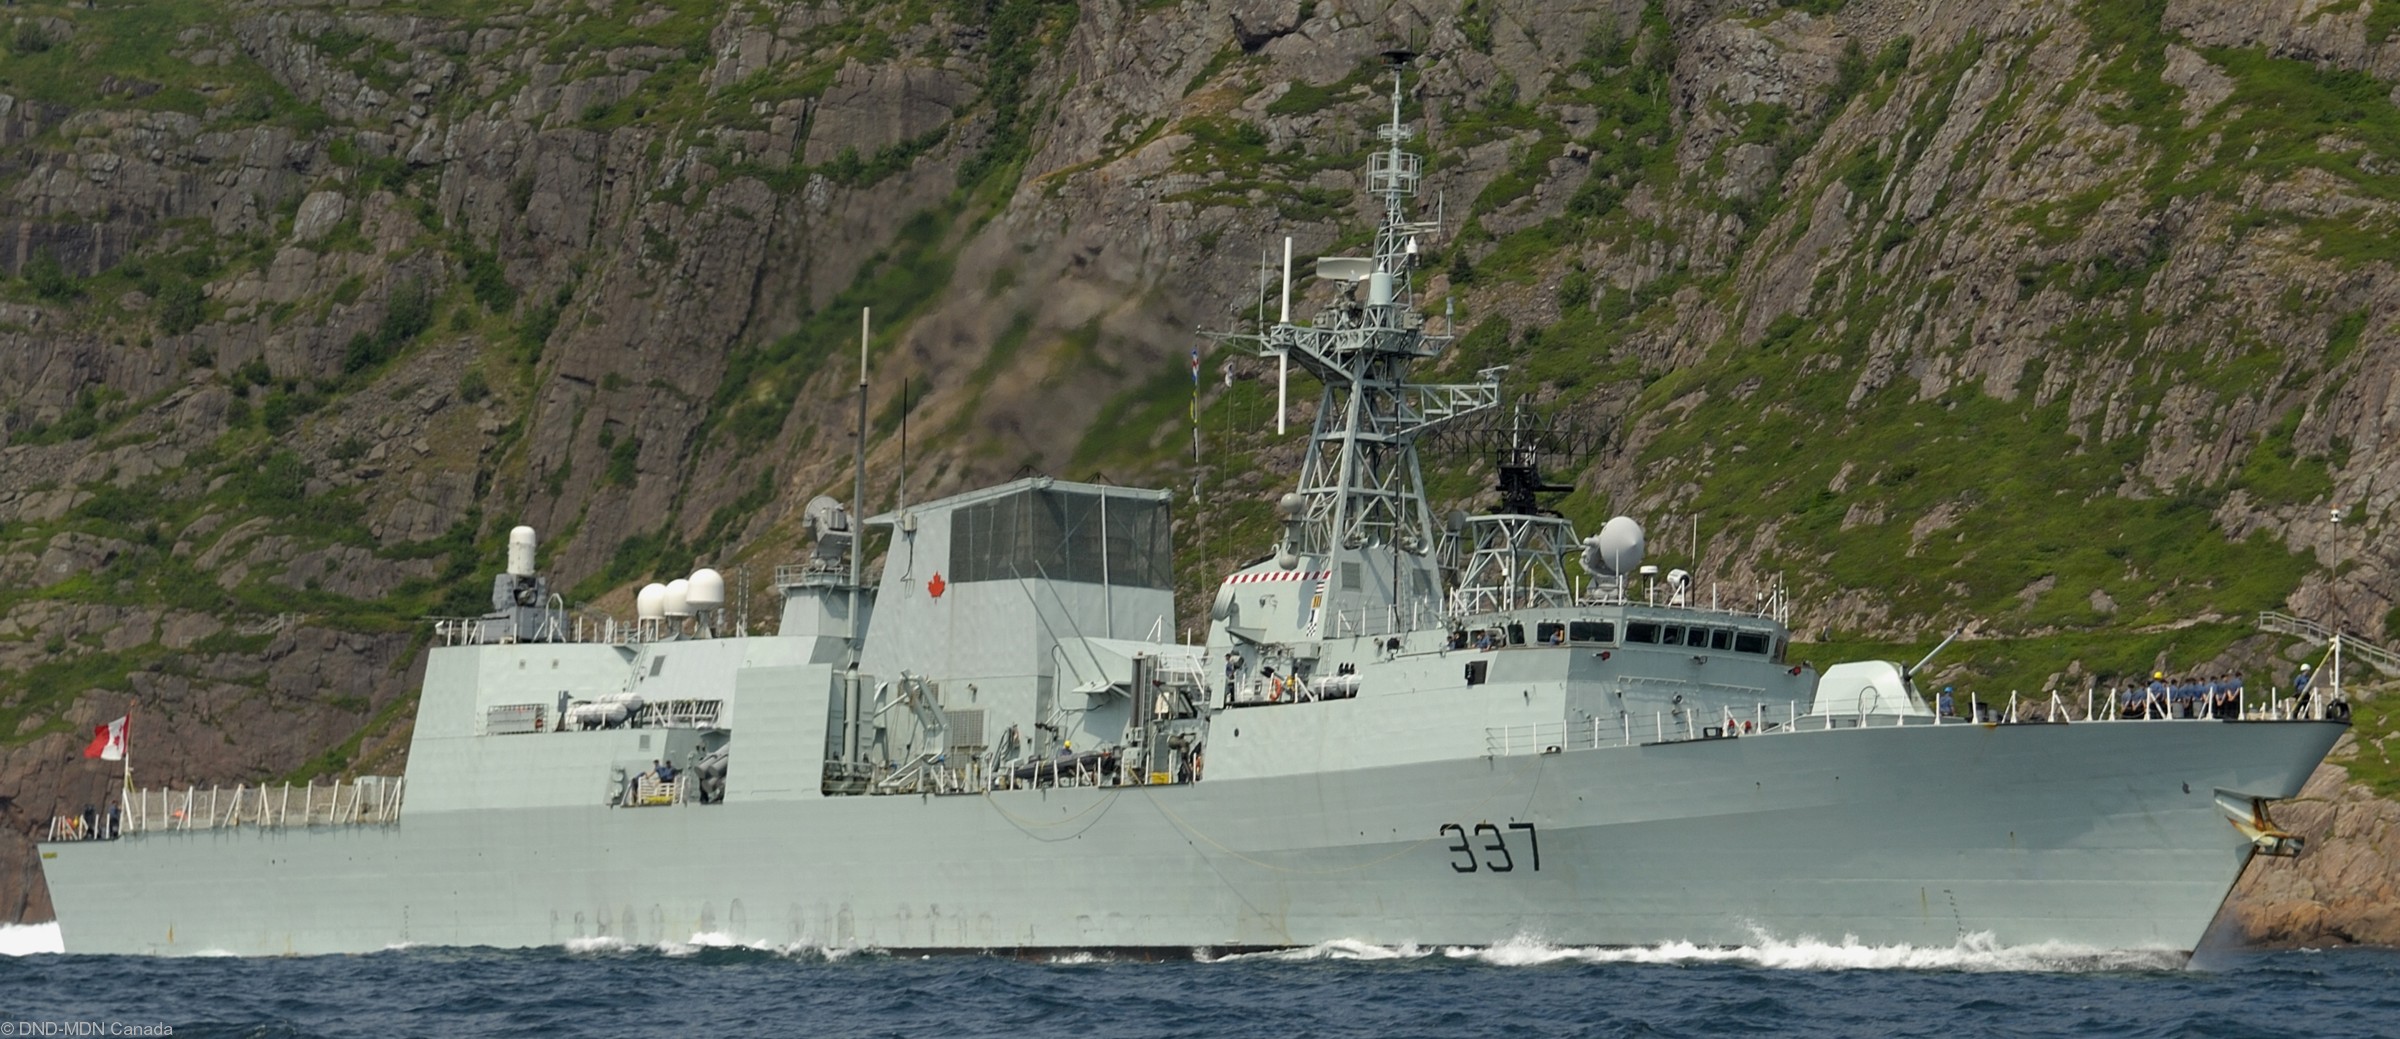 ffh-337 hmcs fredericton halifax class helicopter patrol frigate ncsm royal canadian navy 41